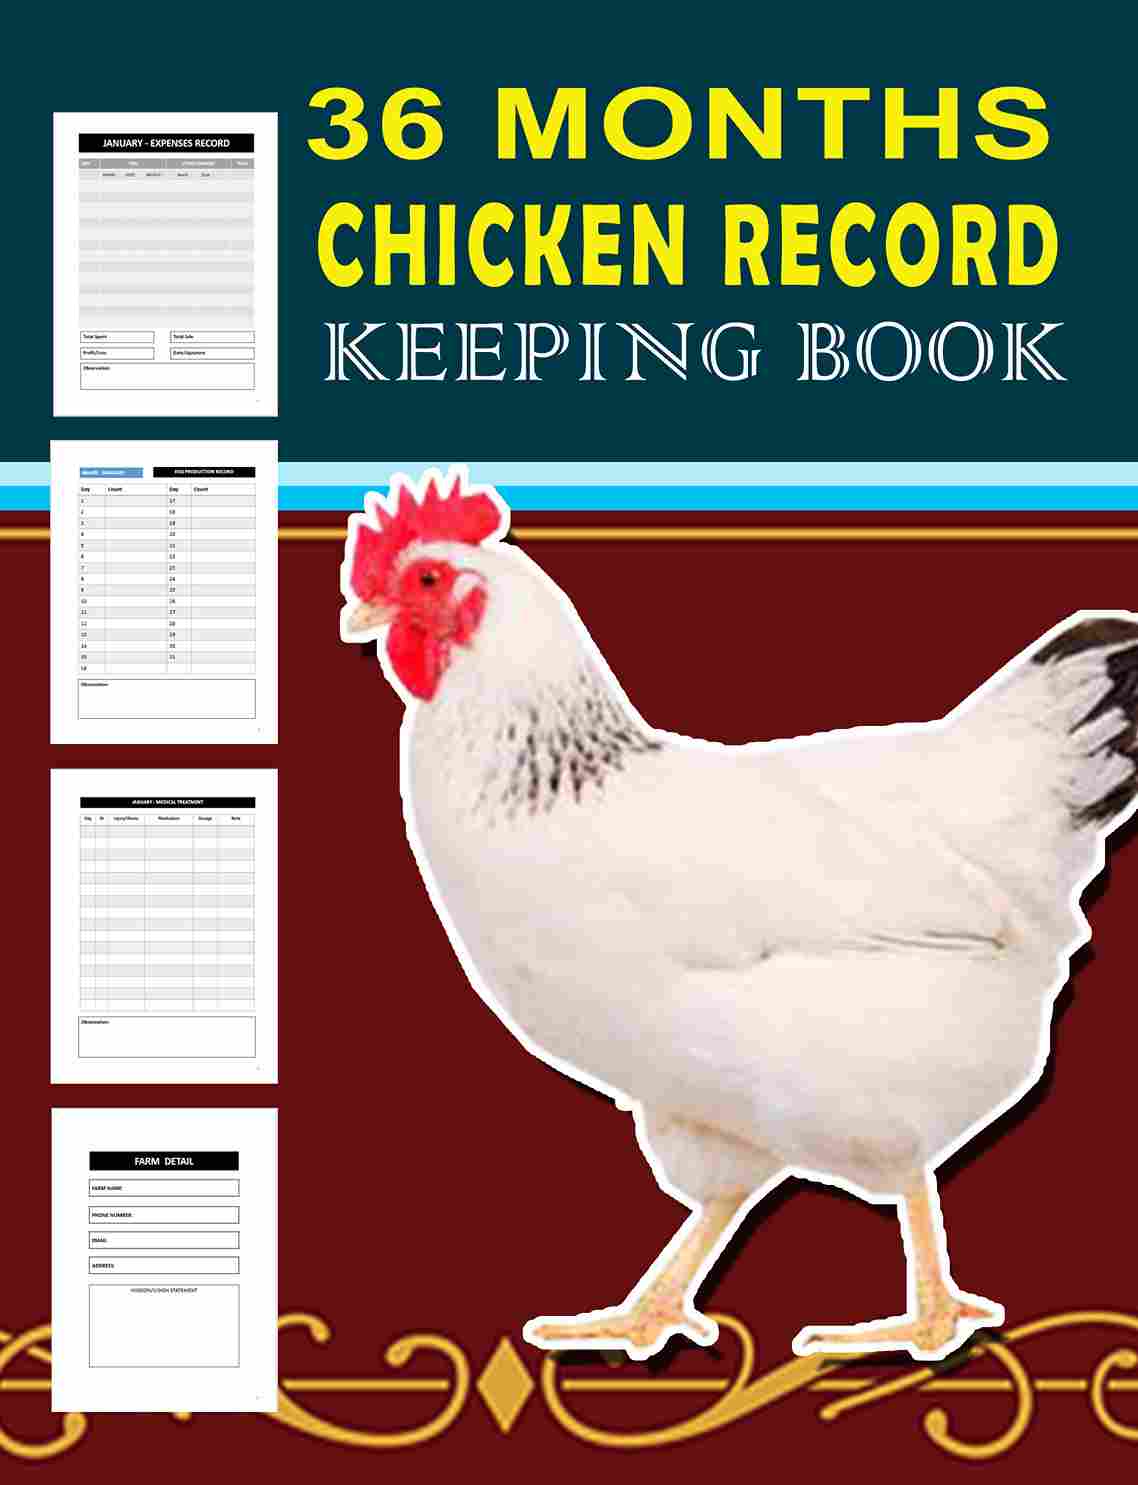 36 Months Chicken Record Keeping Book